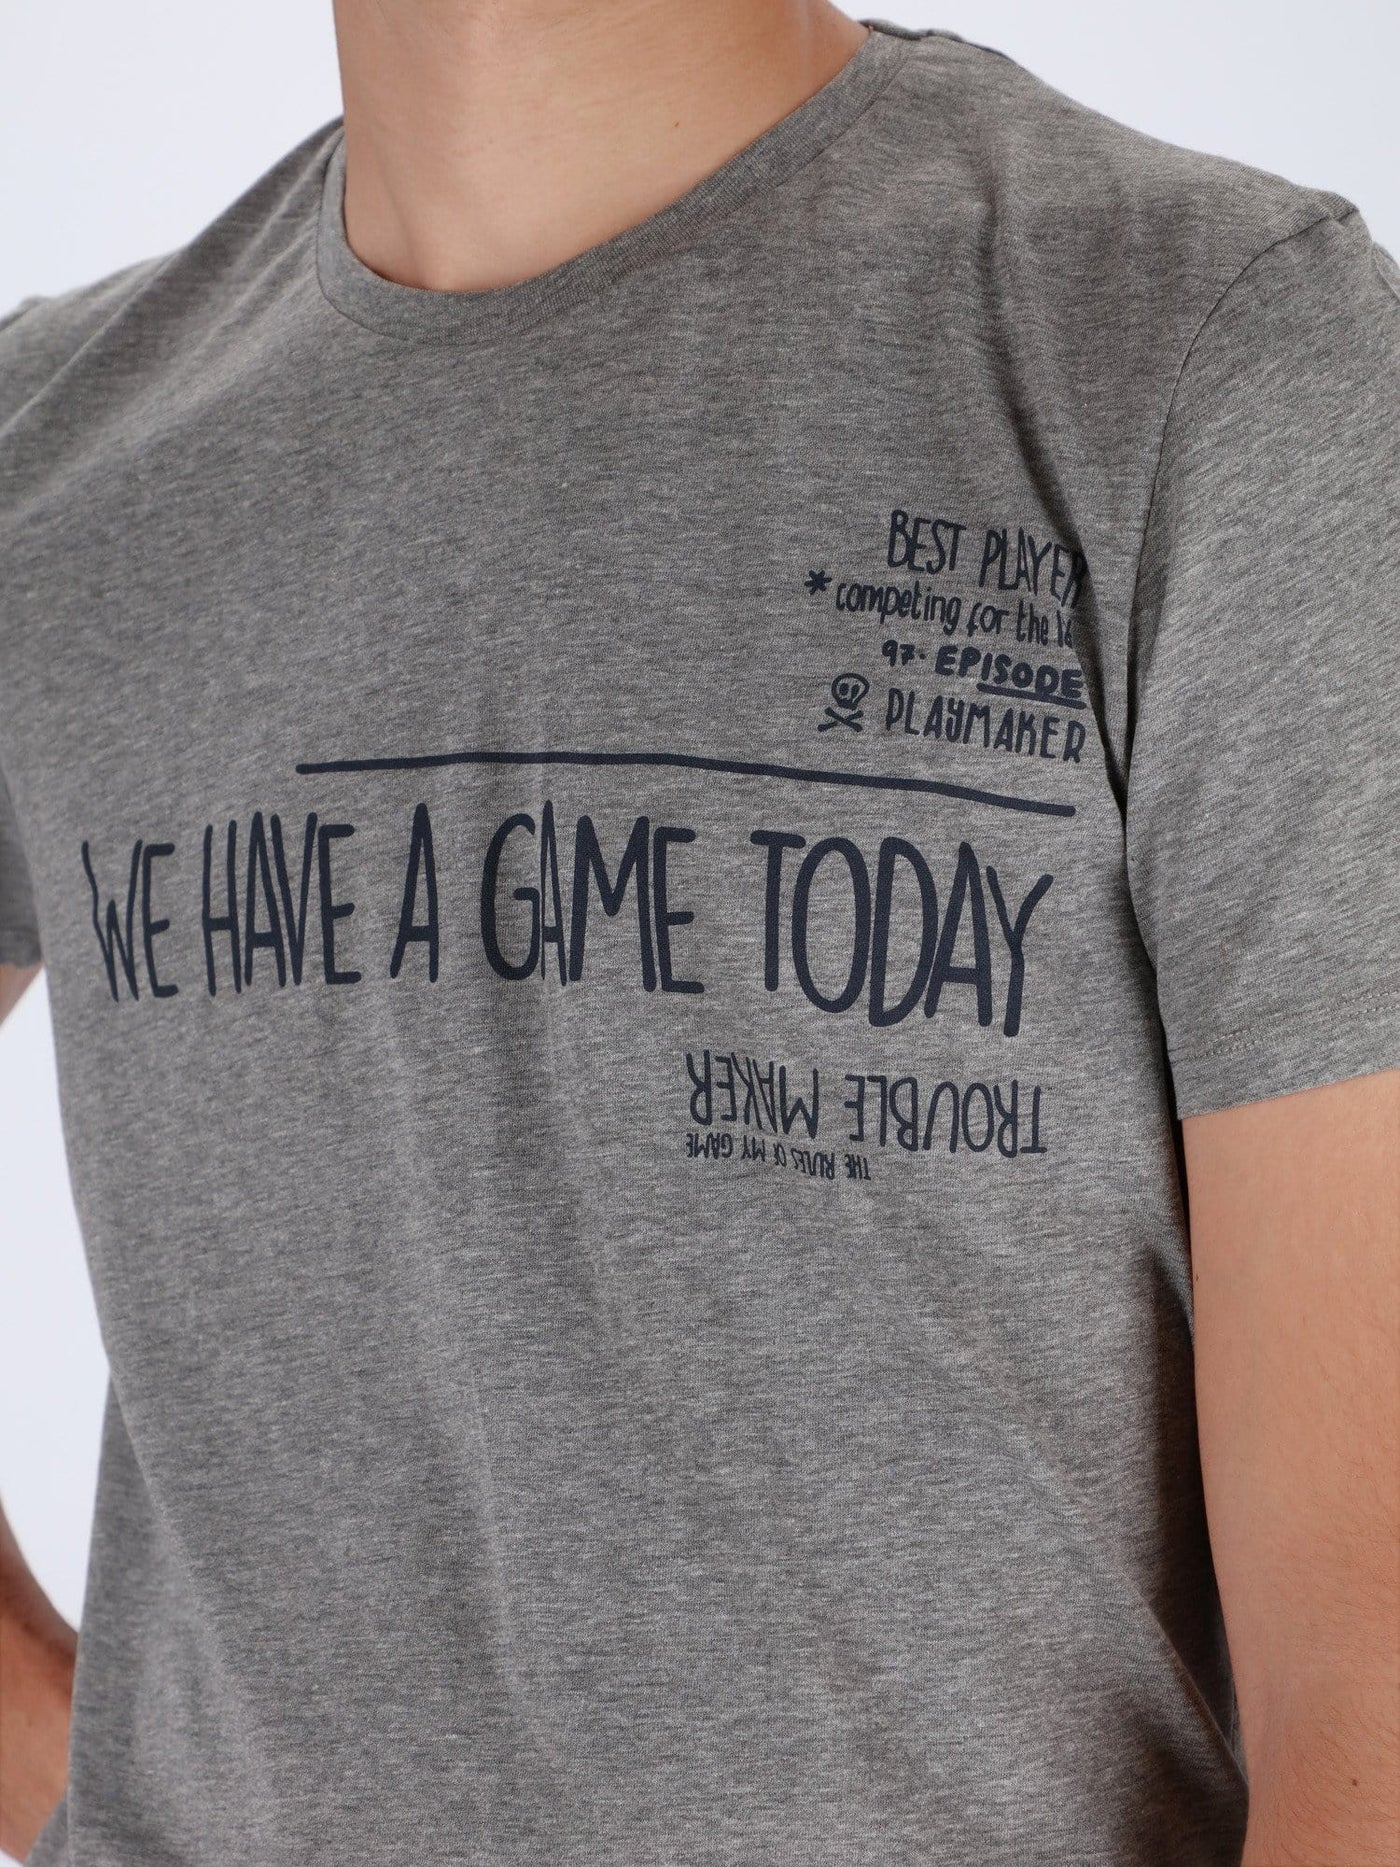 OR T-Shirts Game Today Front Print T-Shirt